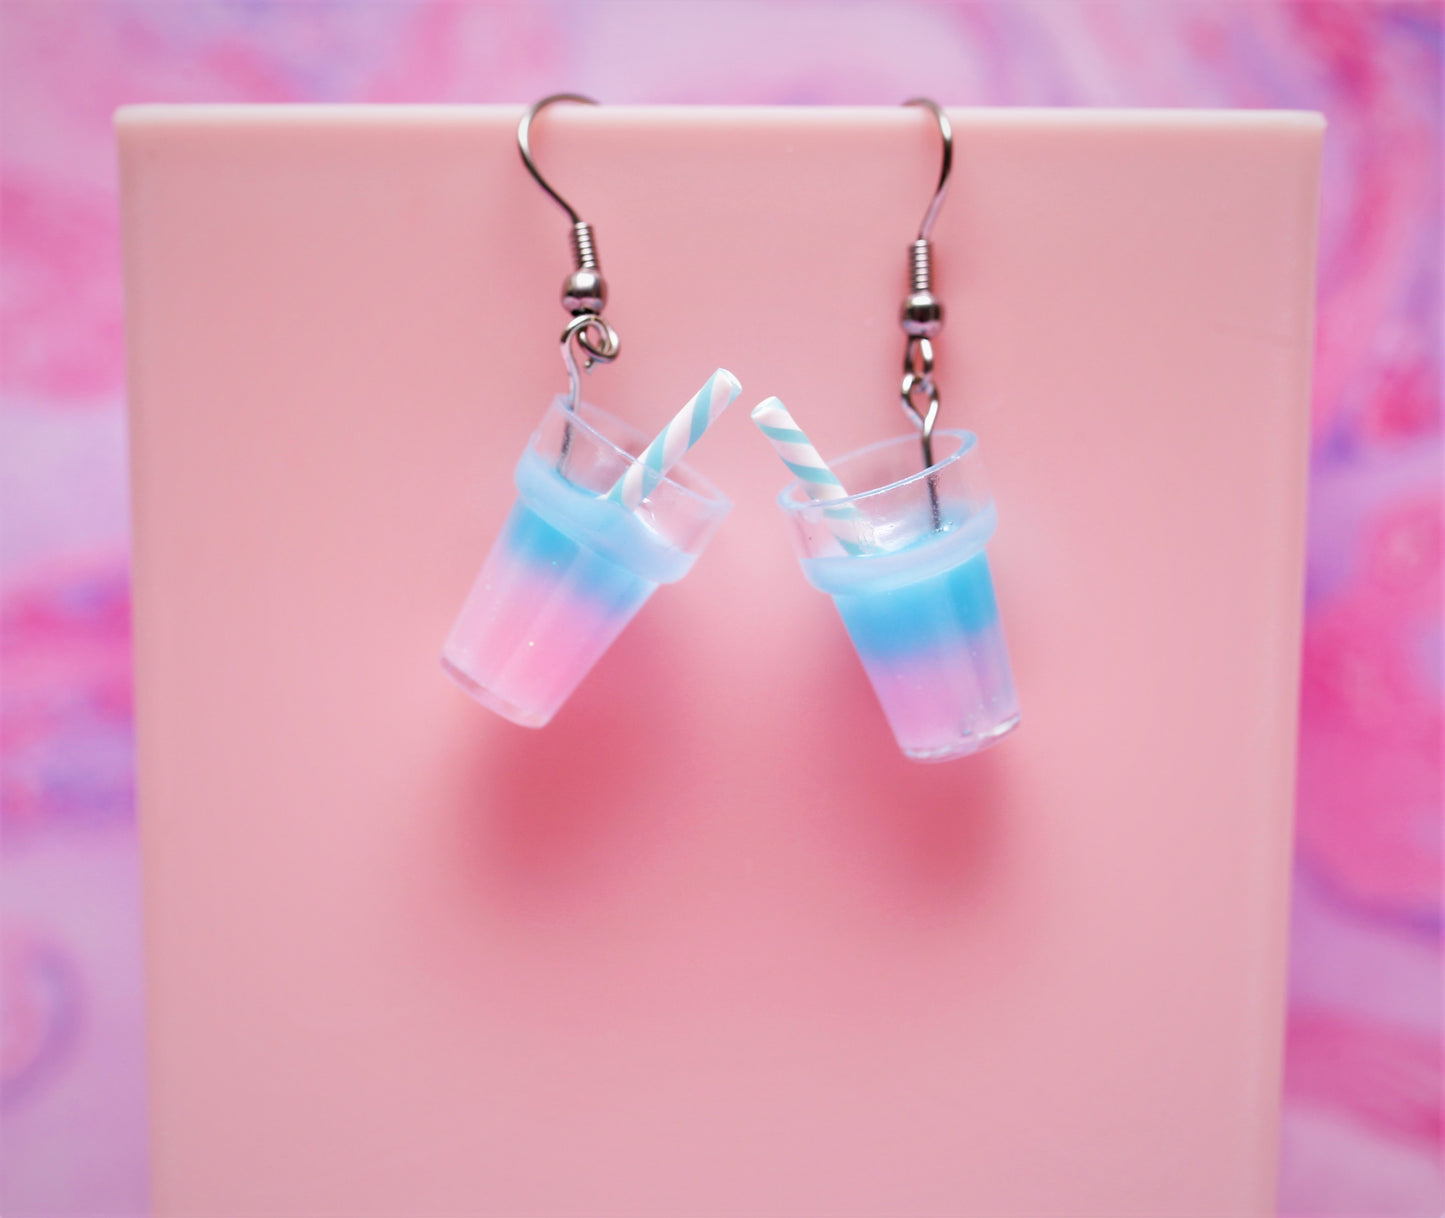 Blueberry & Strawberry Smoothie Earrings